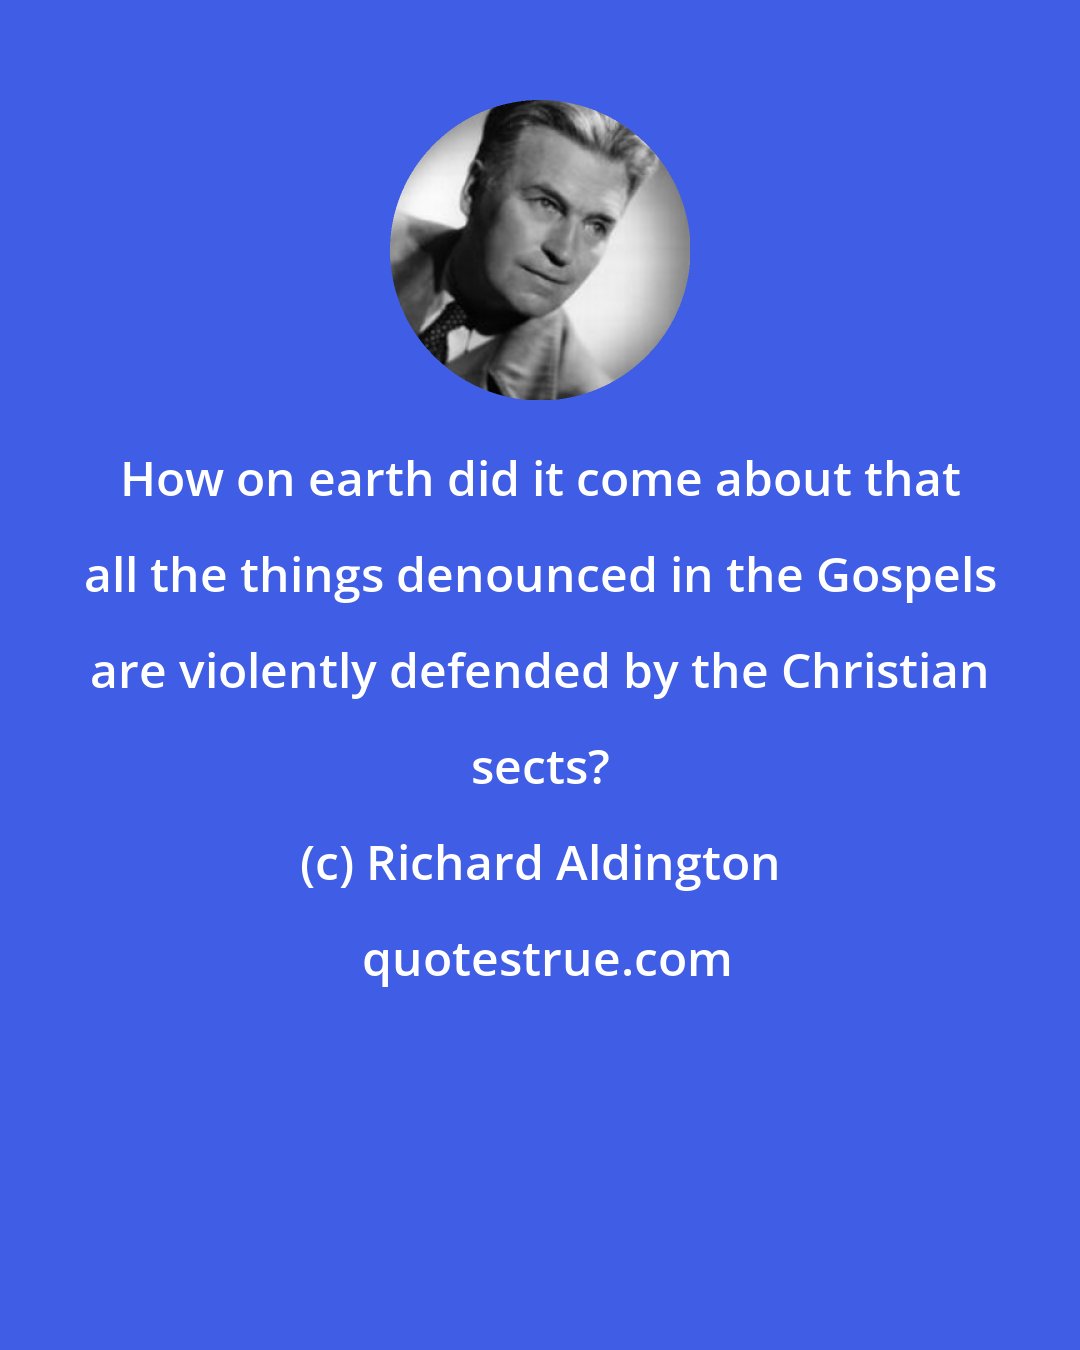 Richard Aldington: How on earth did it come about that all the things denounced in the Gospels are violently defended by the Christian sects?